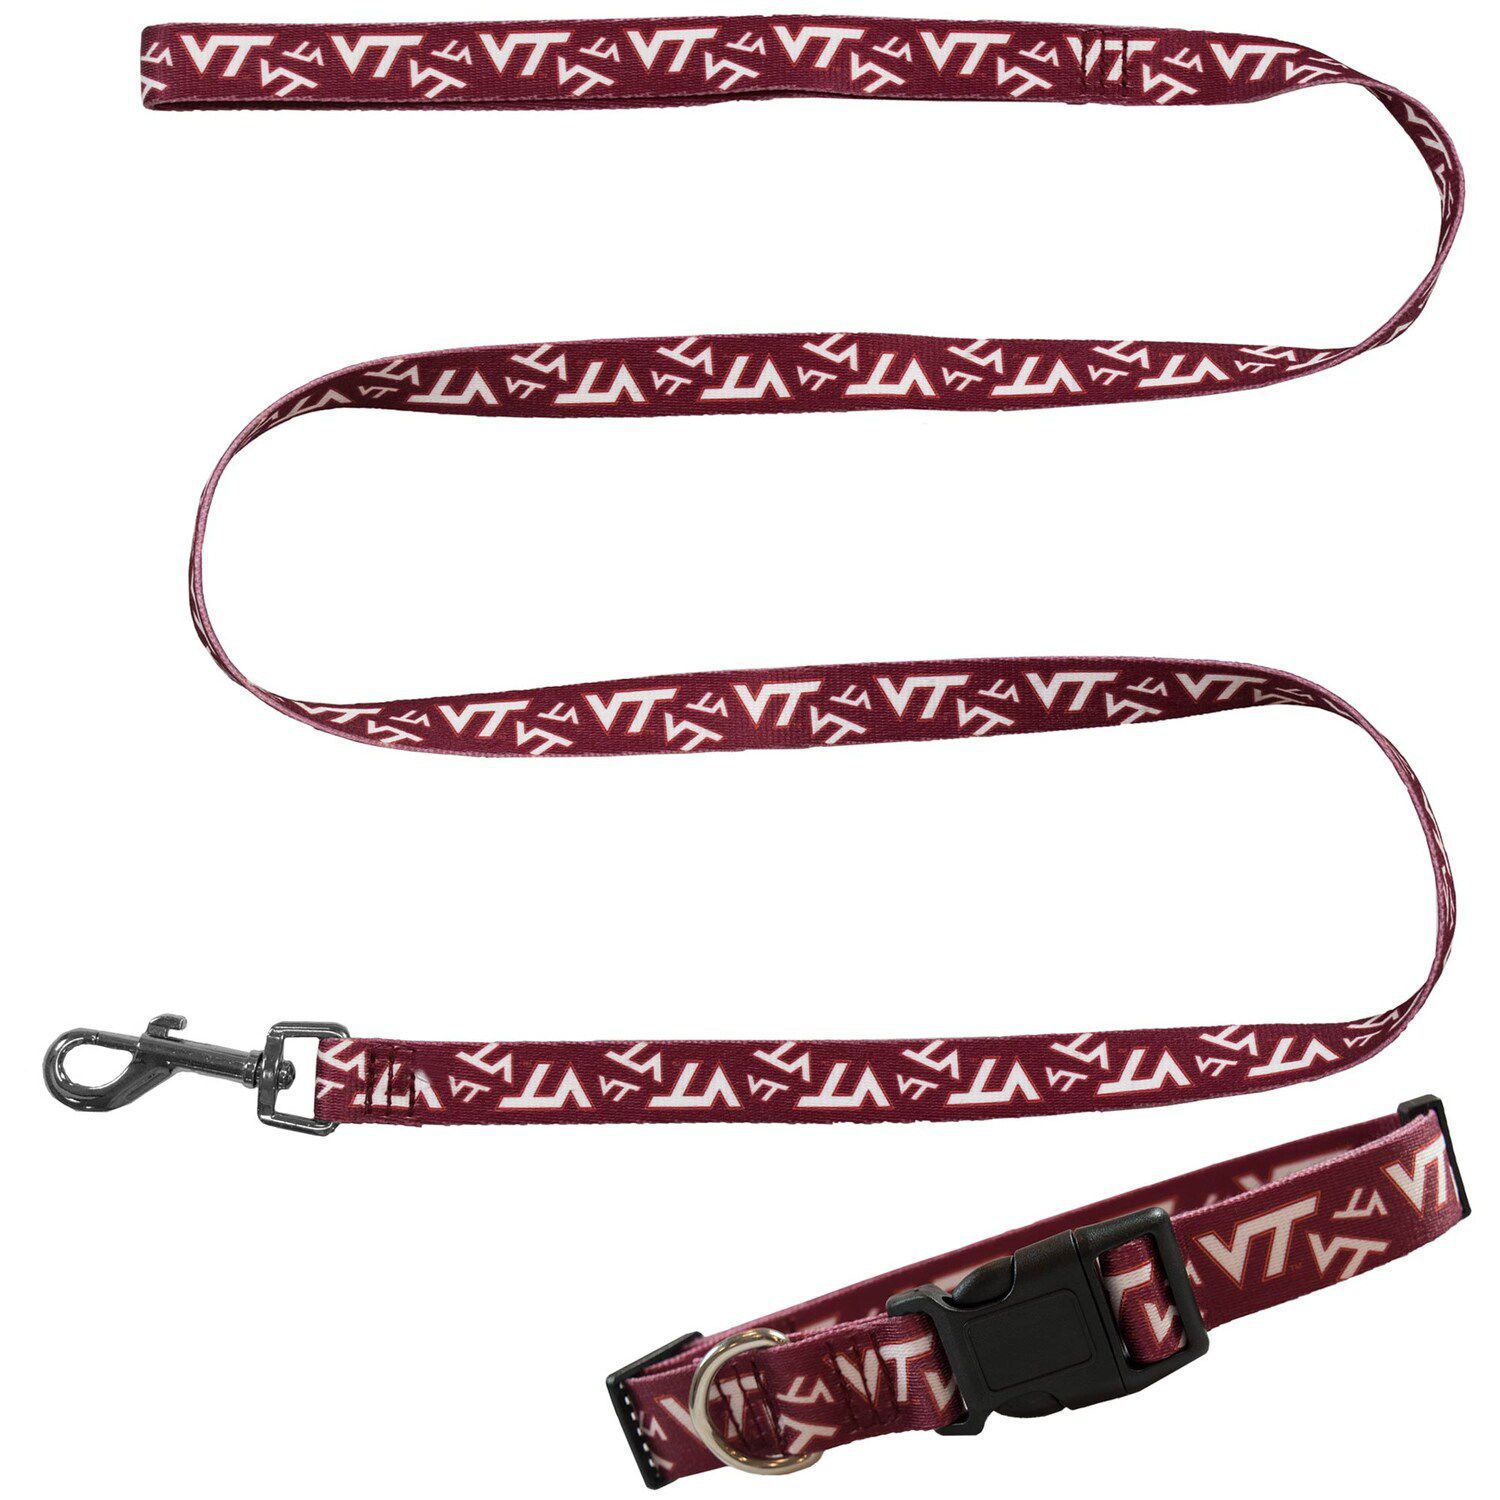 Image for Unbranded Little Earth Virginia Tech Hokies Collar and Leash Set at Kohl's.